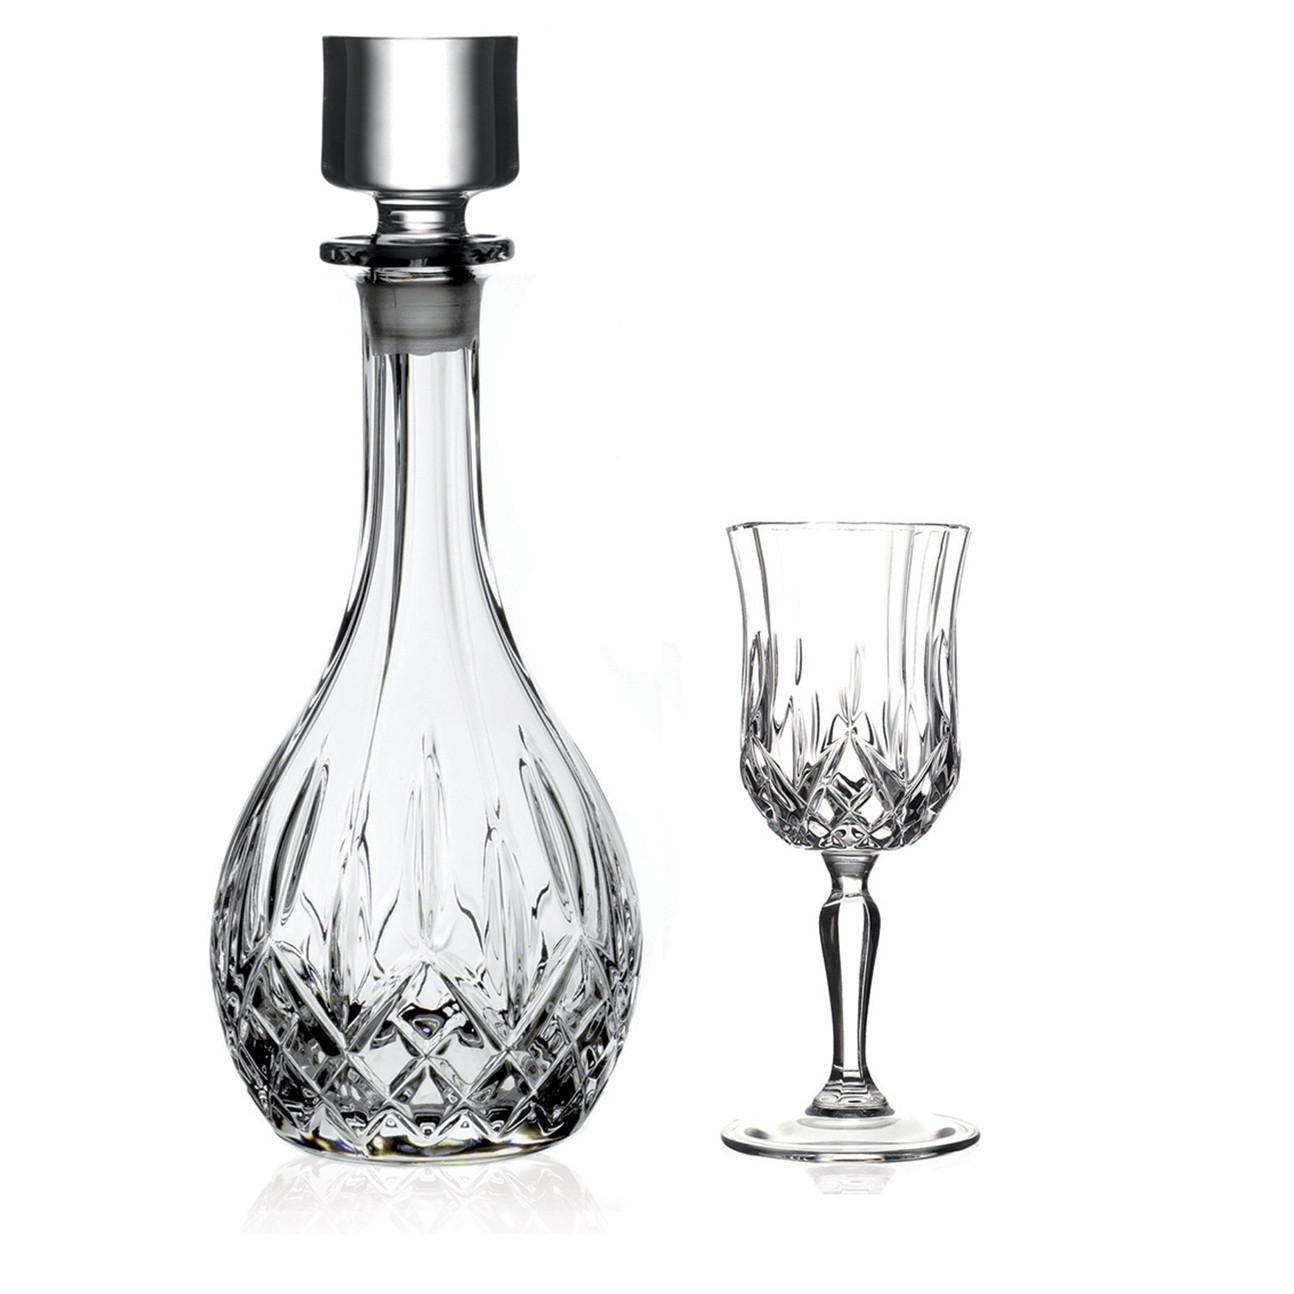 Rcr Crystal Vase Of Rcr Rcr Crystal within Special Offers